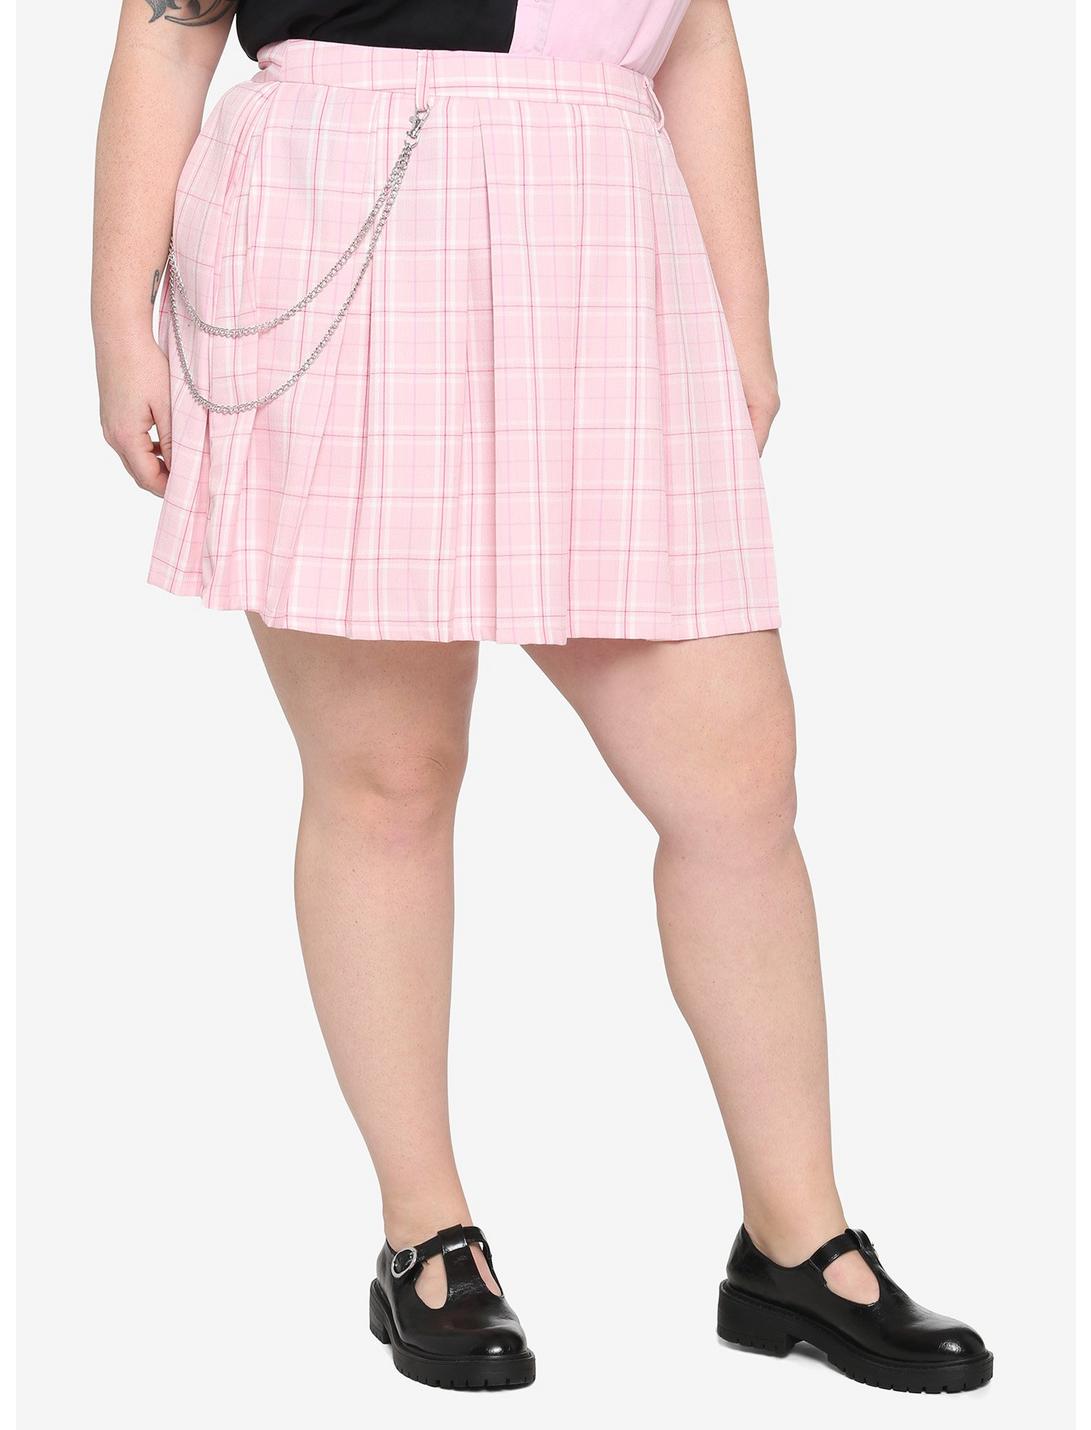 Pink Plaid Chain Pleated Skirt Plus Size, PLAID - PINK, hi-res